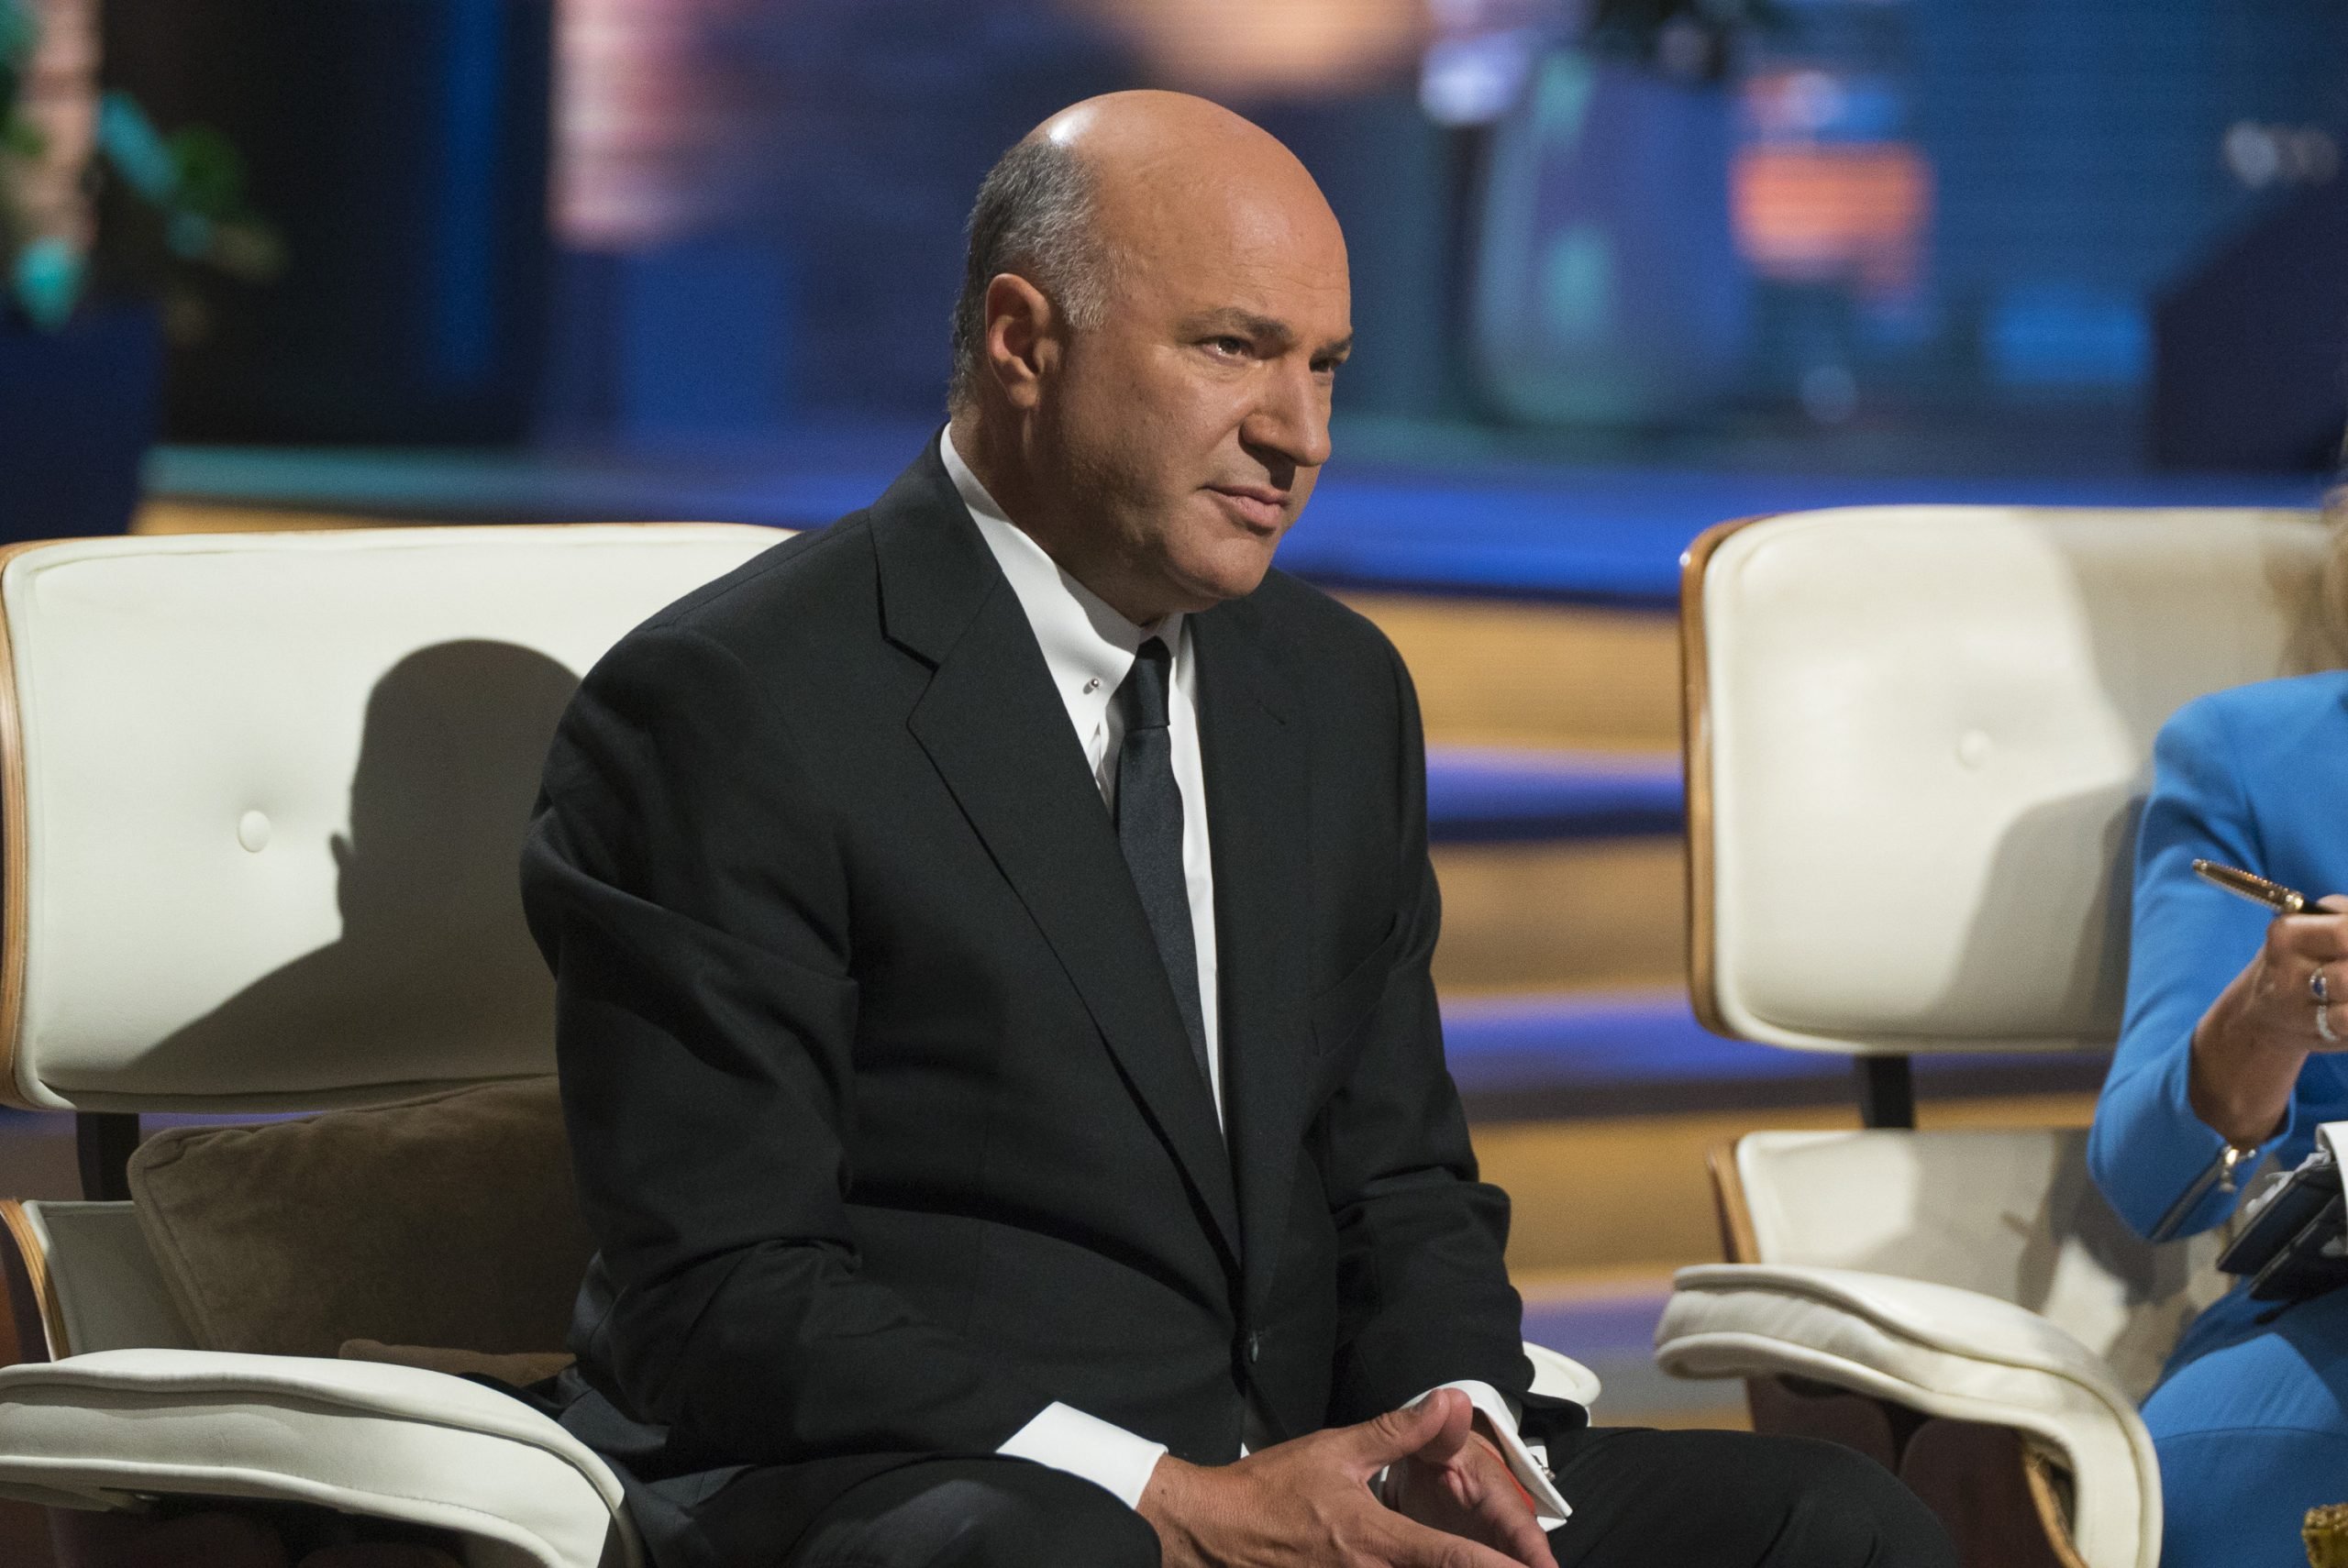 Shark Tank's Kevin O'Leary takes this approach to corporate